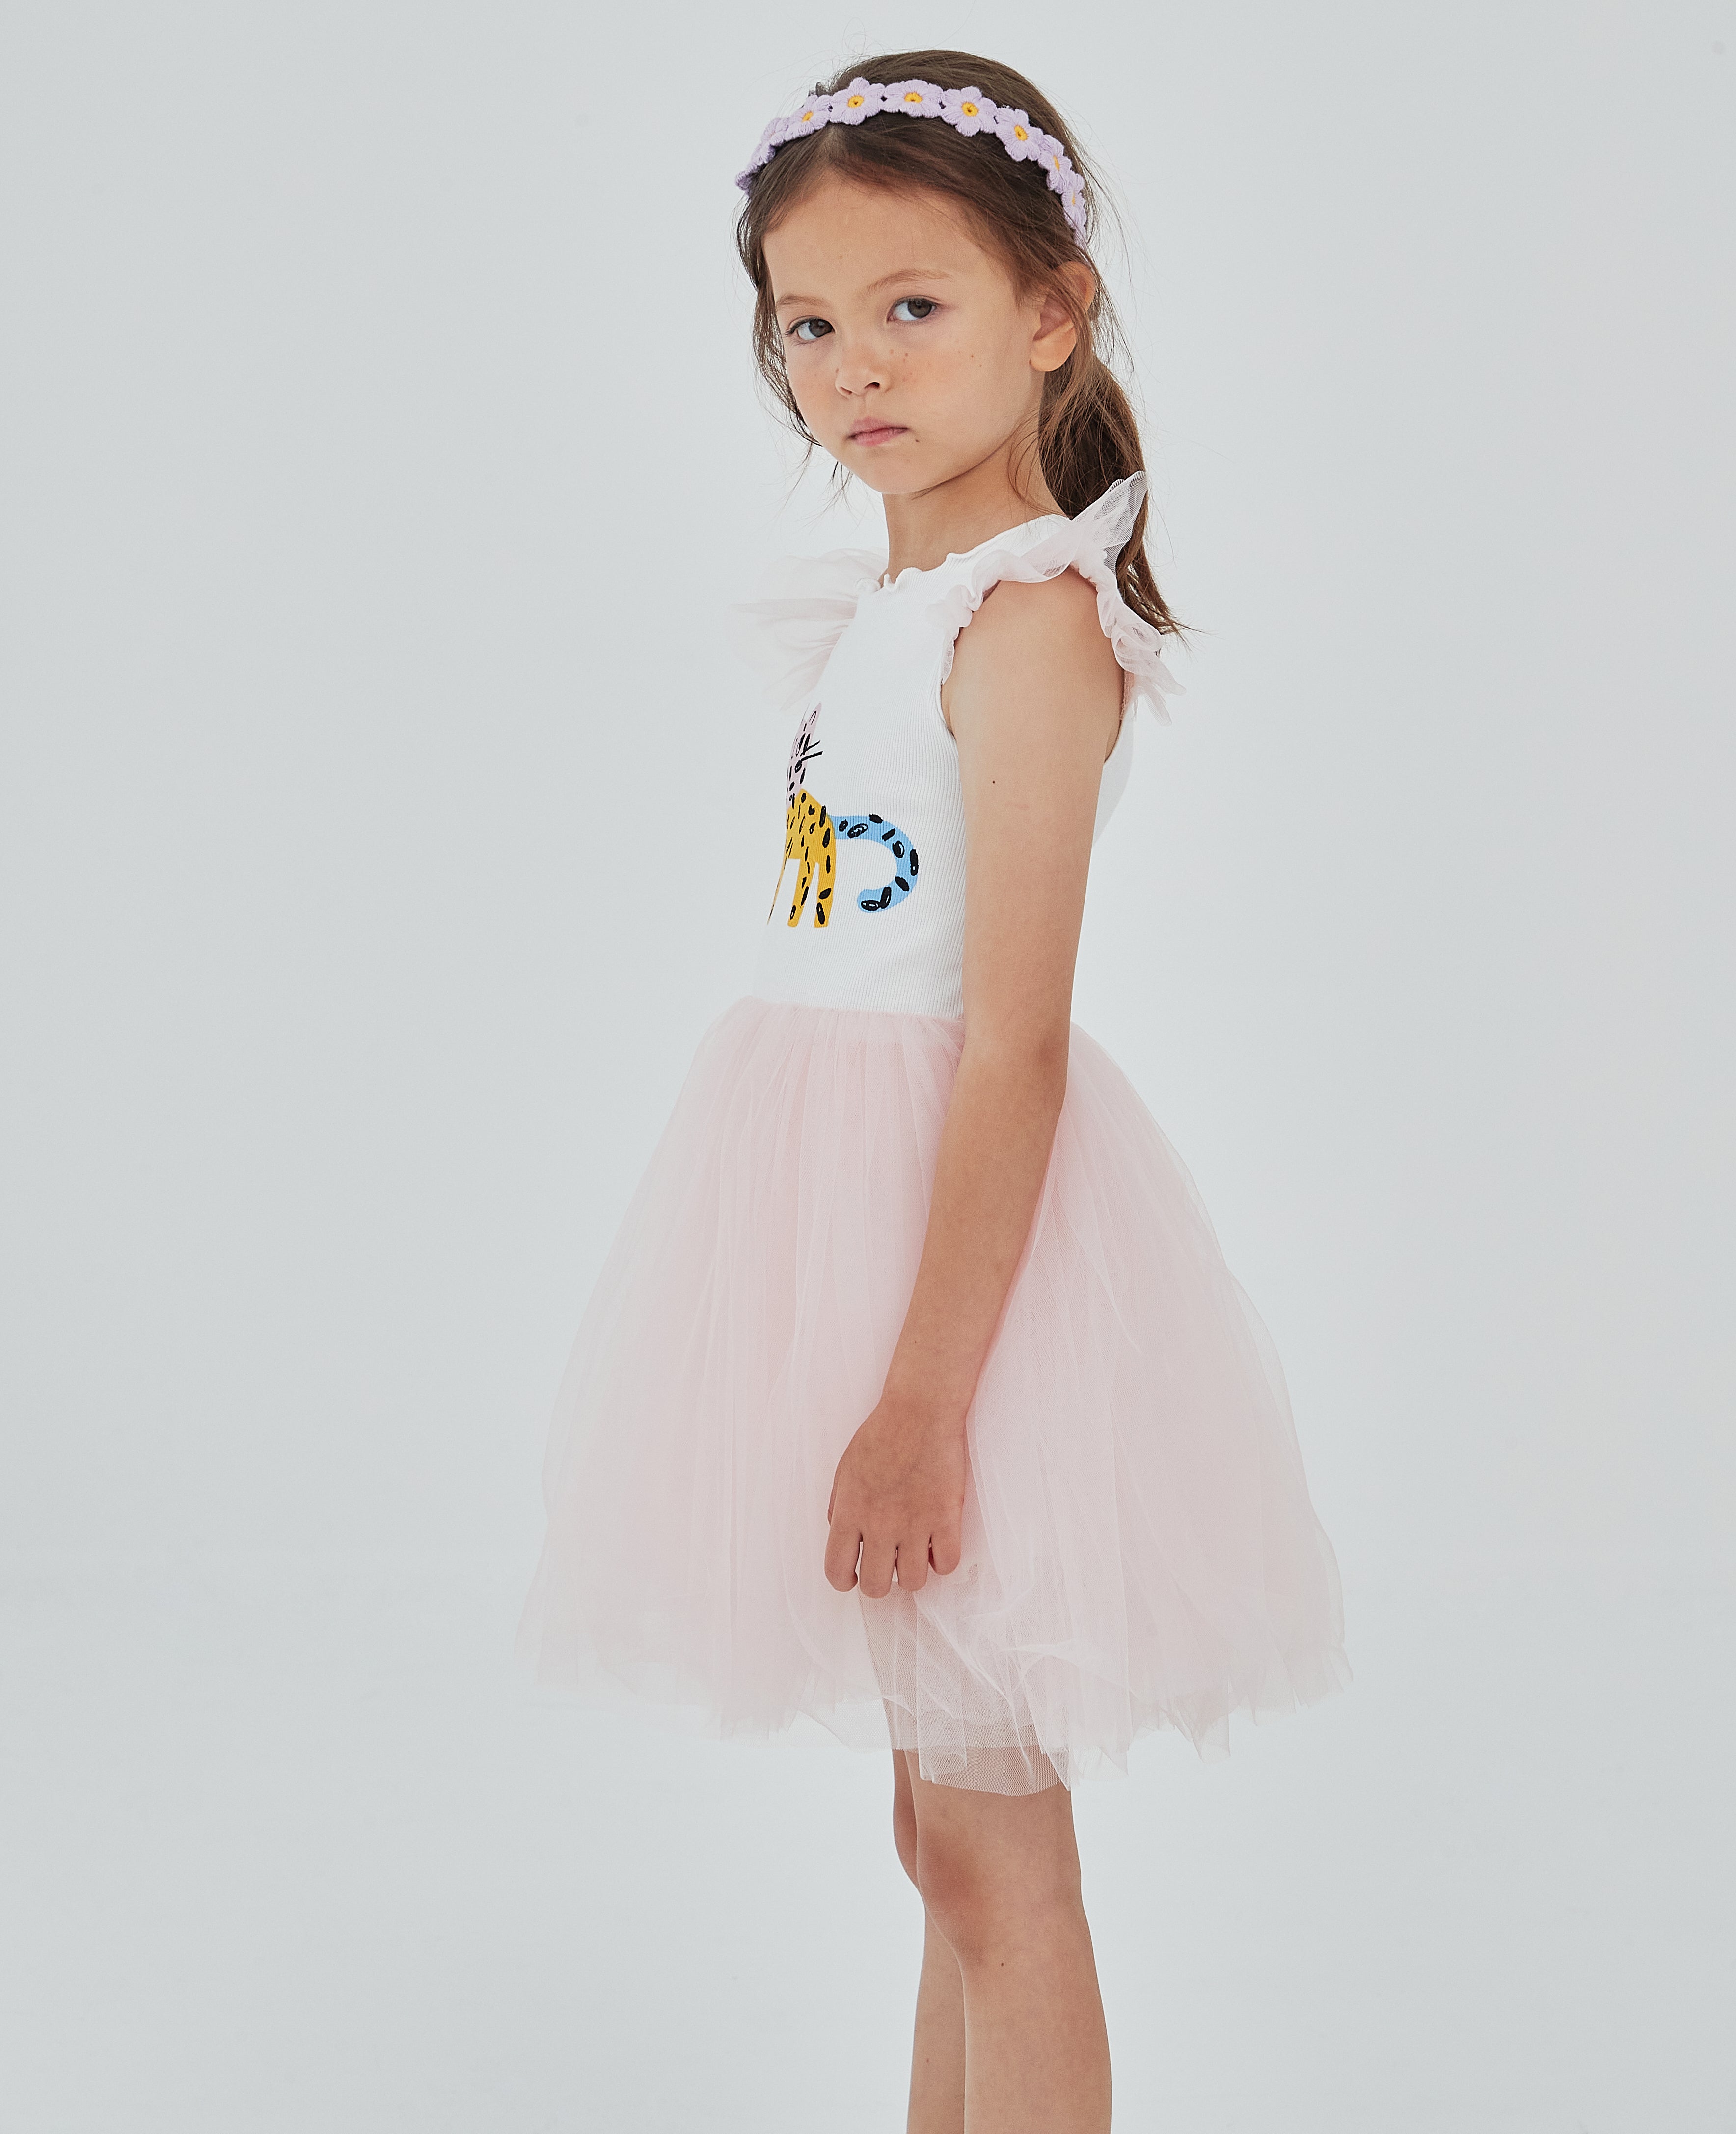 pink and white tutu dress with abstract multicolor cat print on the top front 